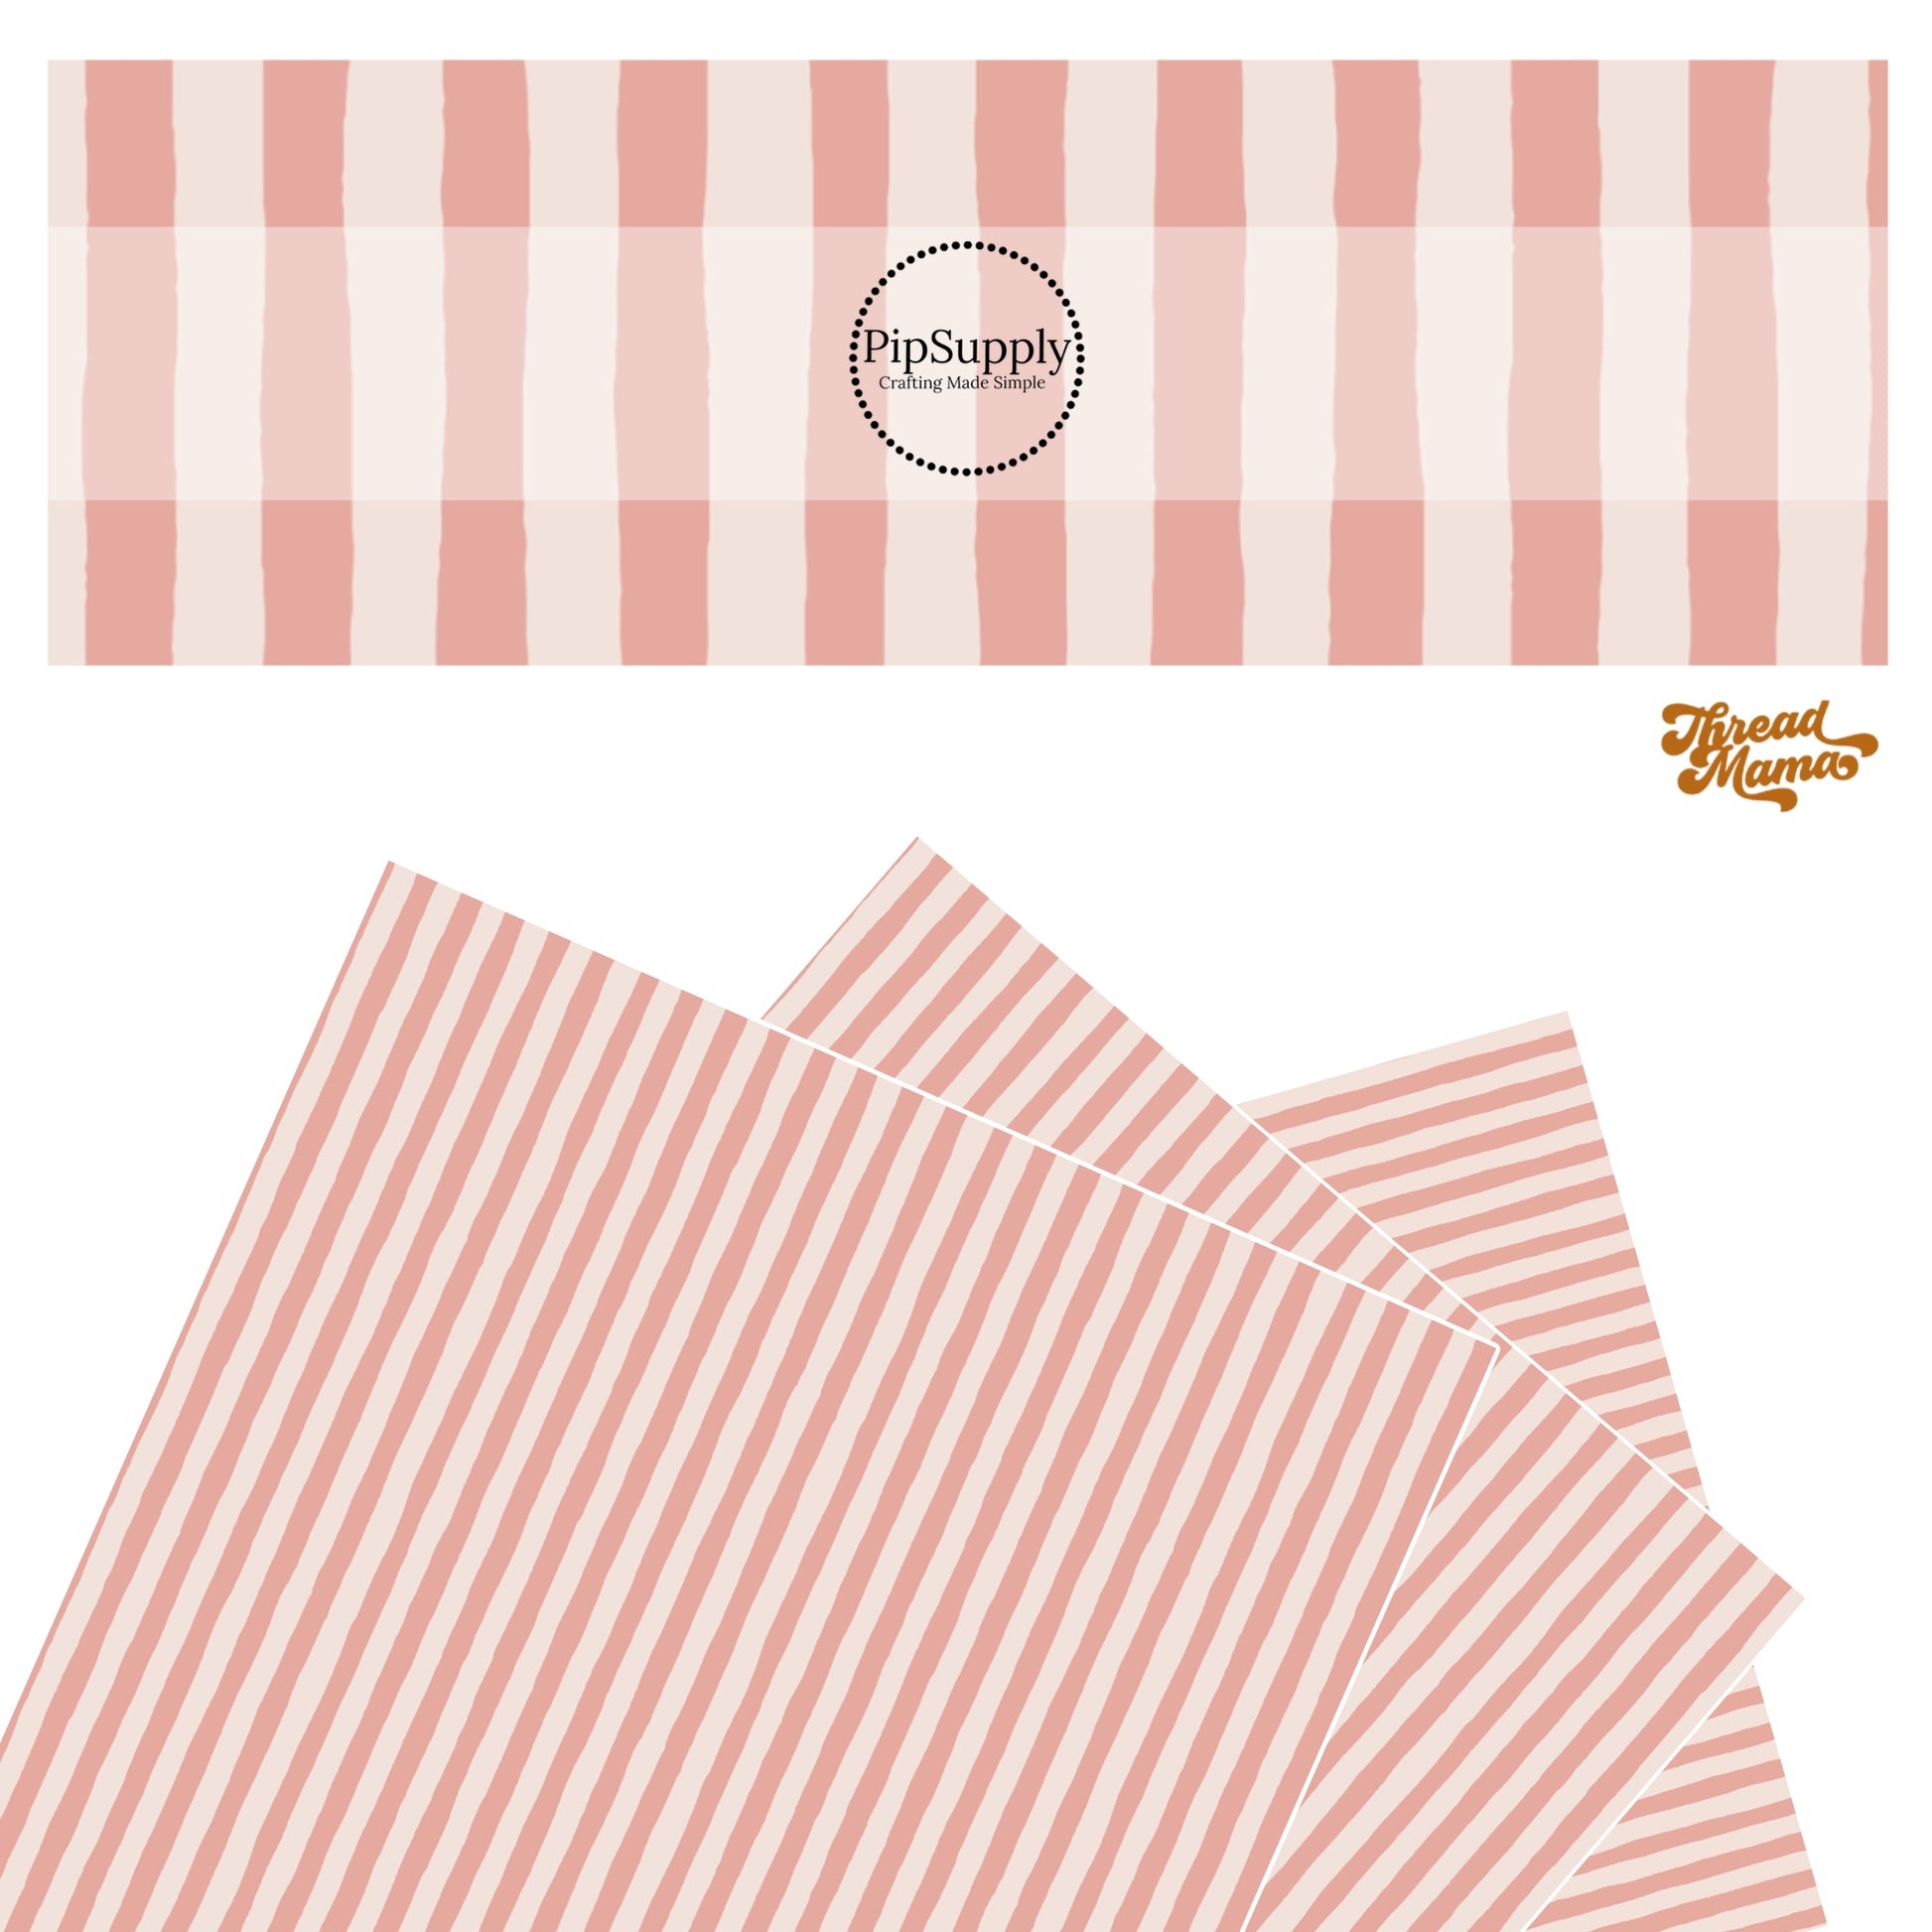 Dusty rose and cream stripe faux leather sheets